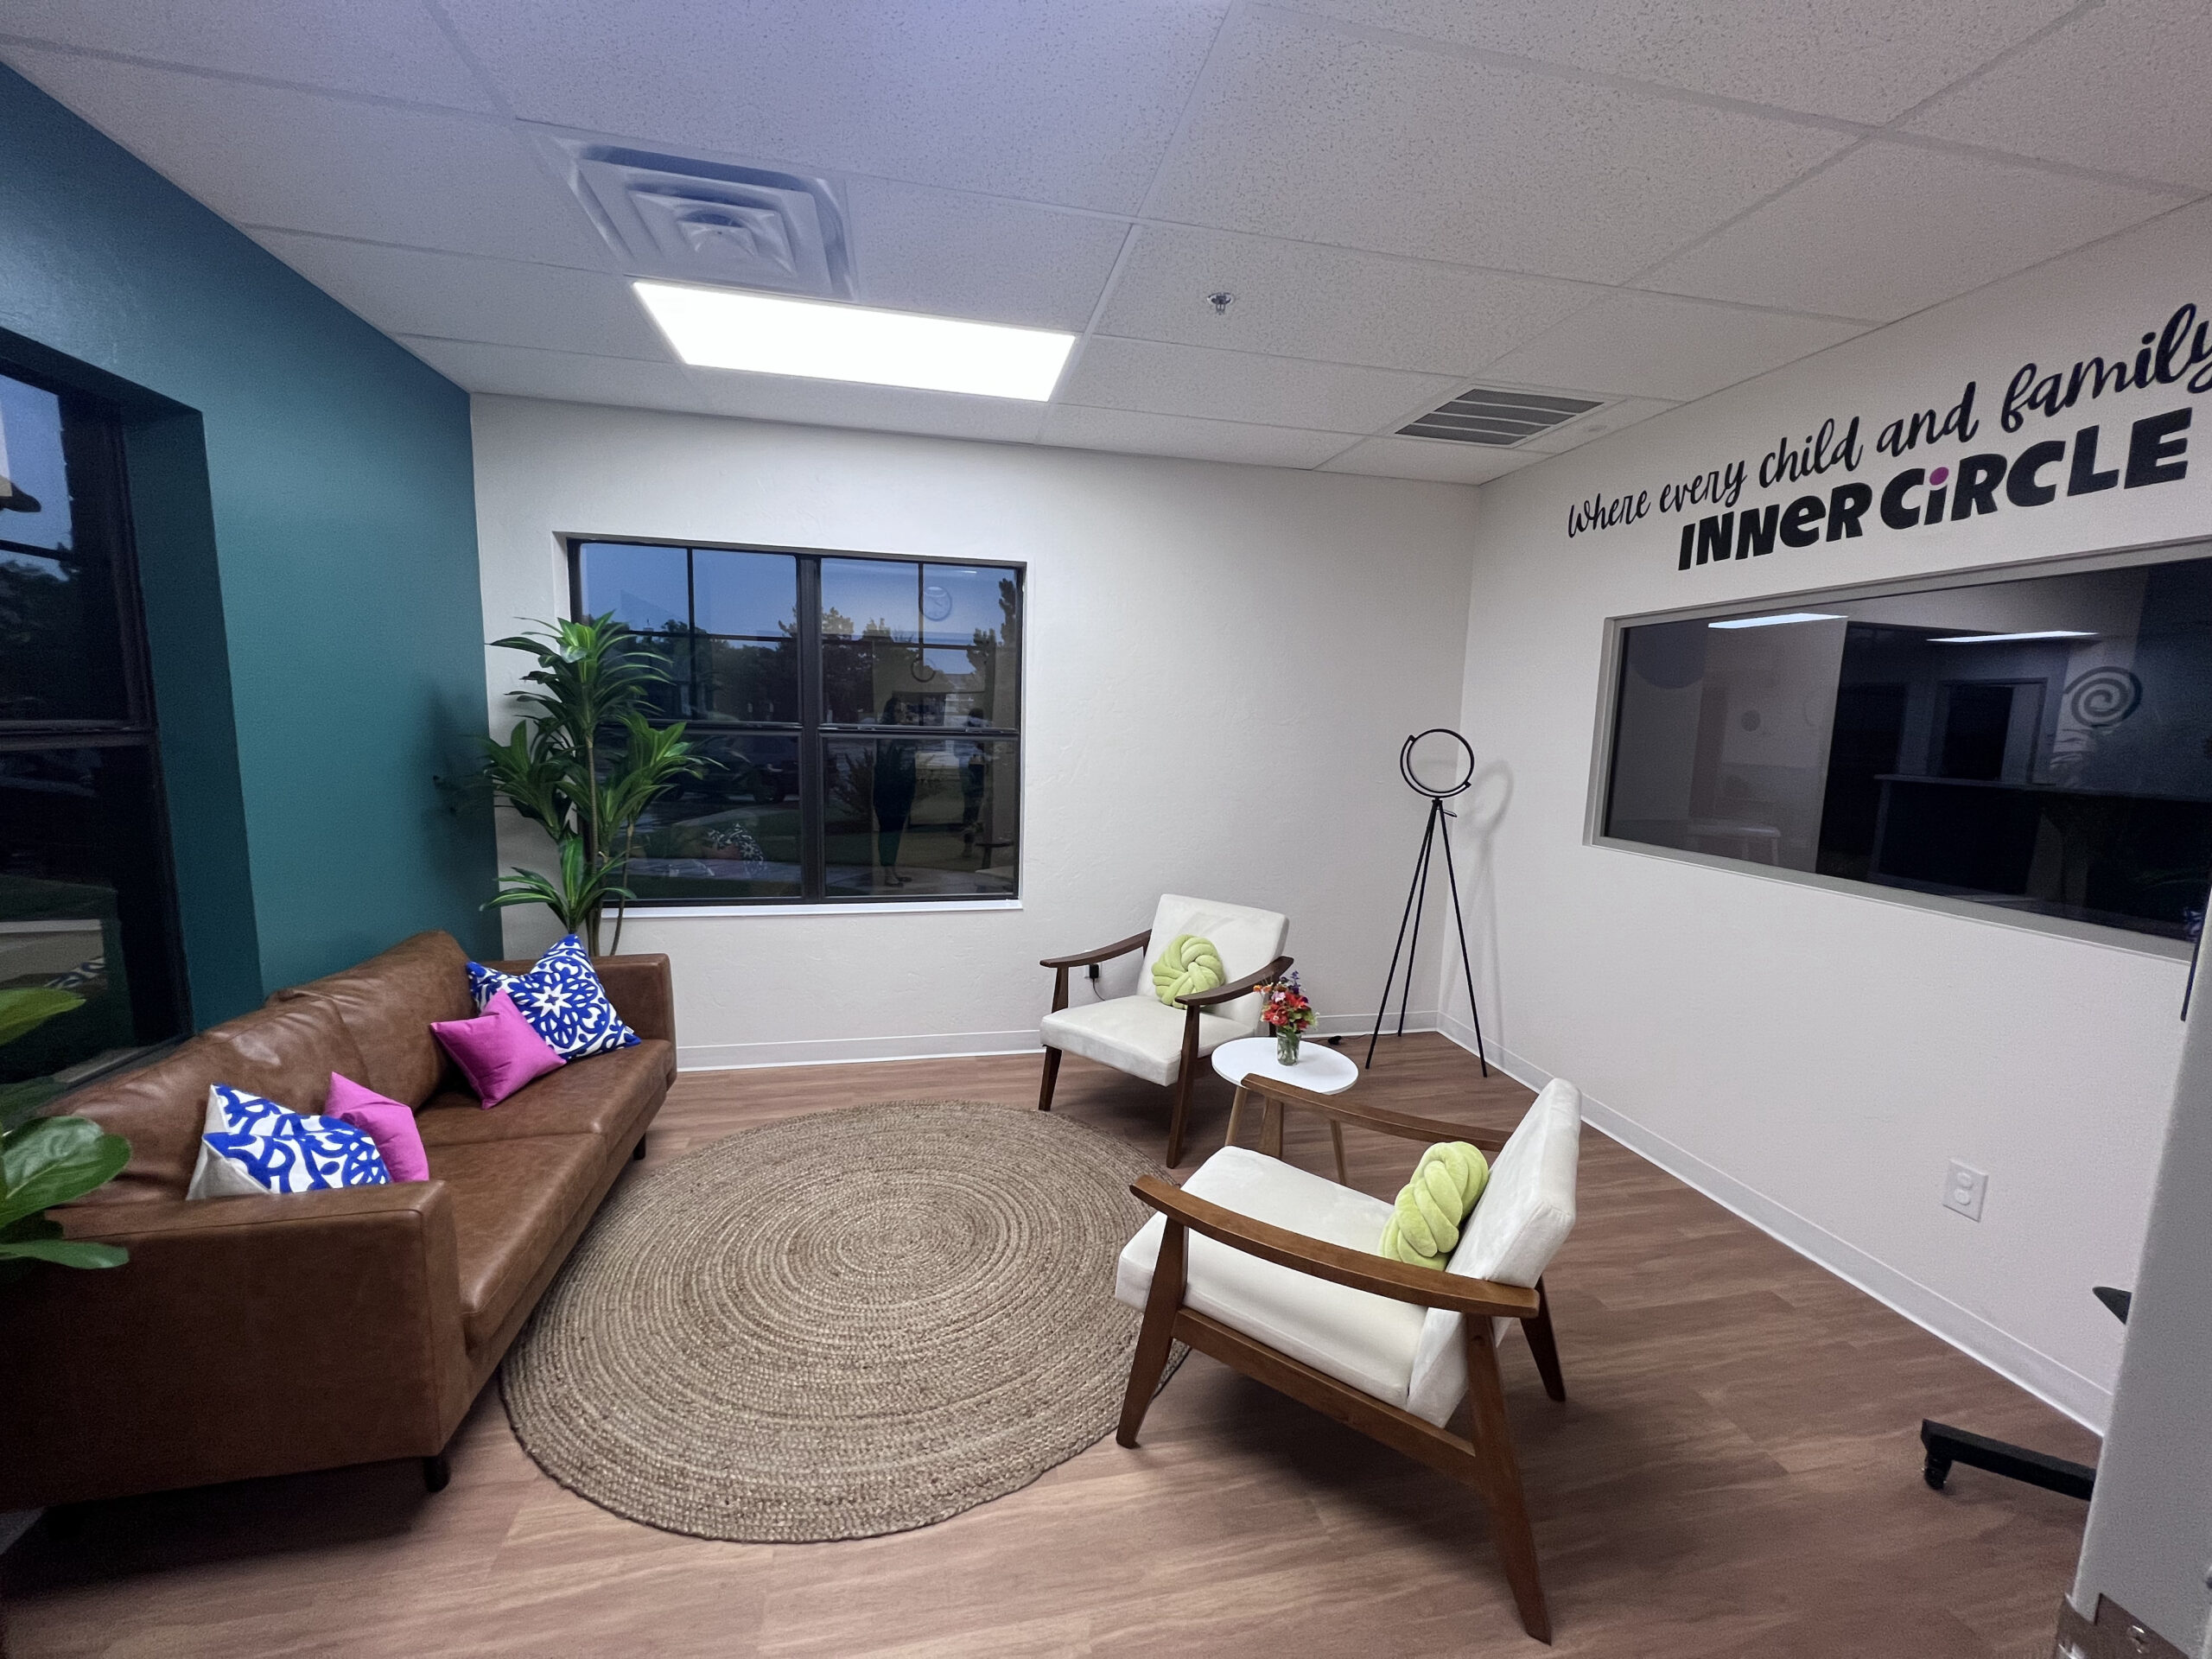 Inner Circle Autism Network | Clinic Design That Works for Children and our Staff